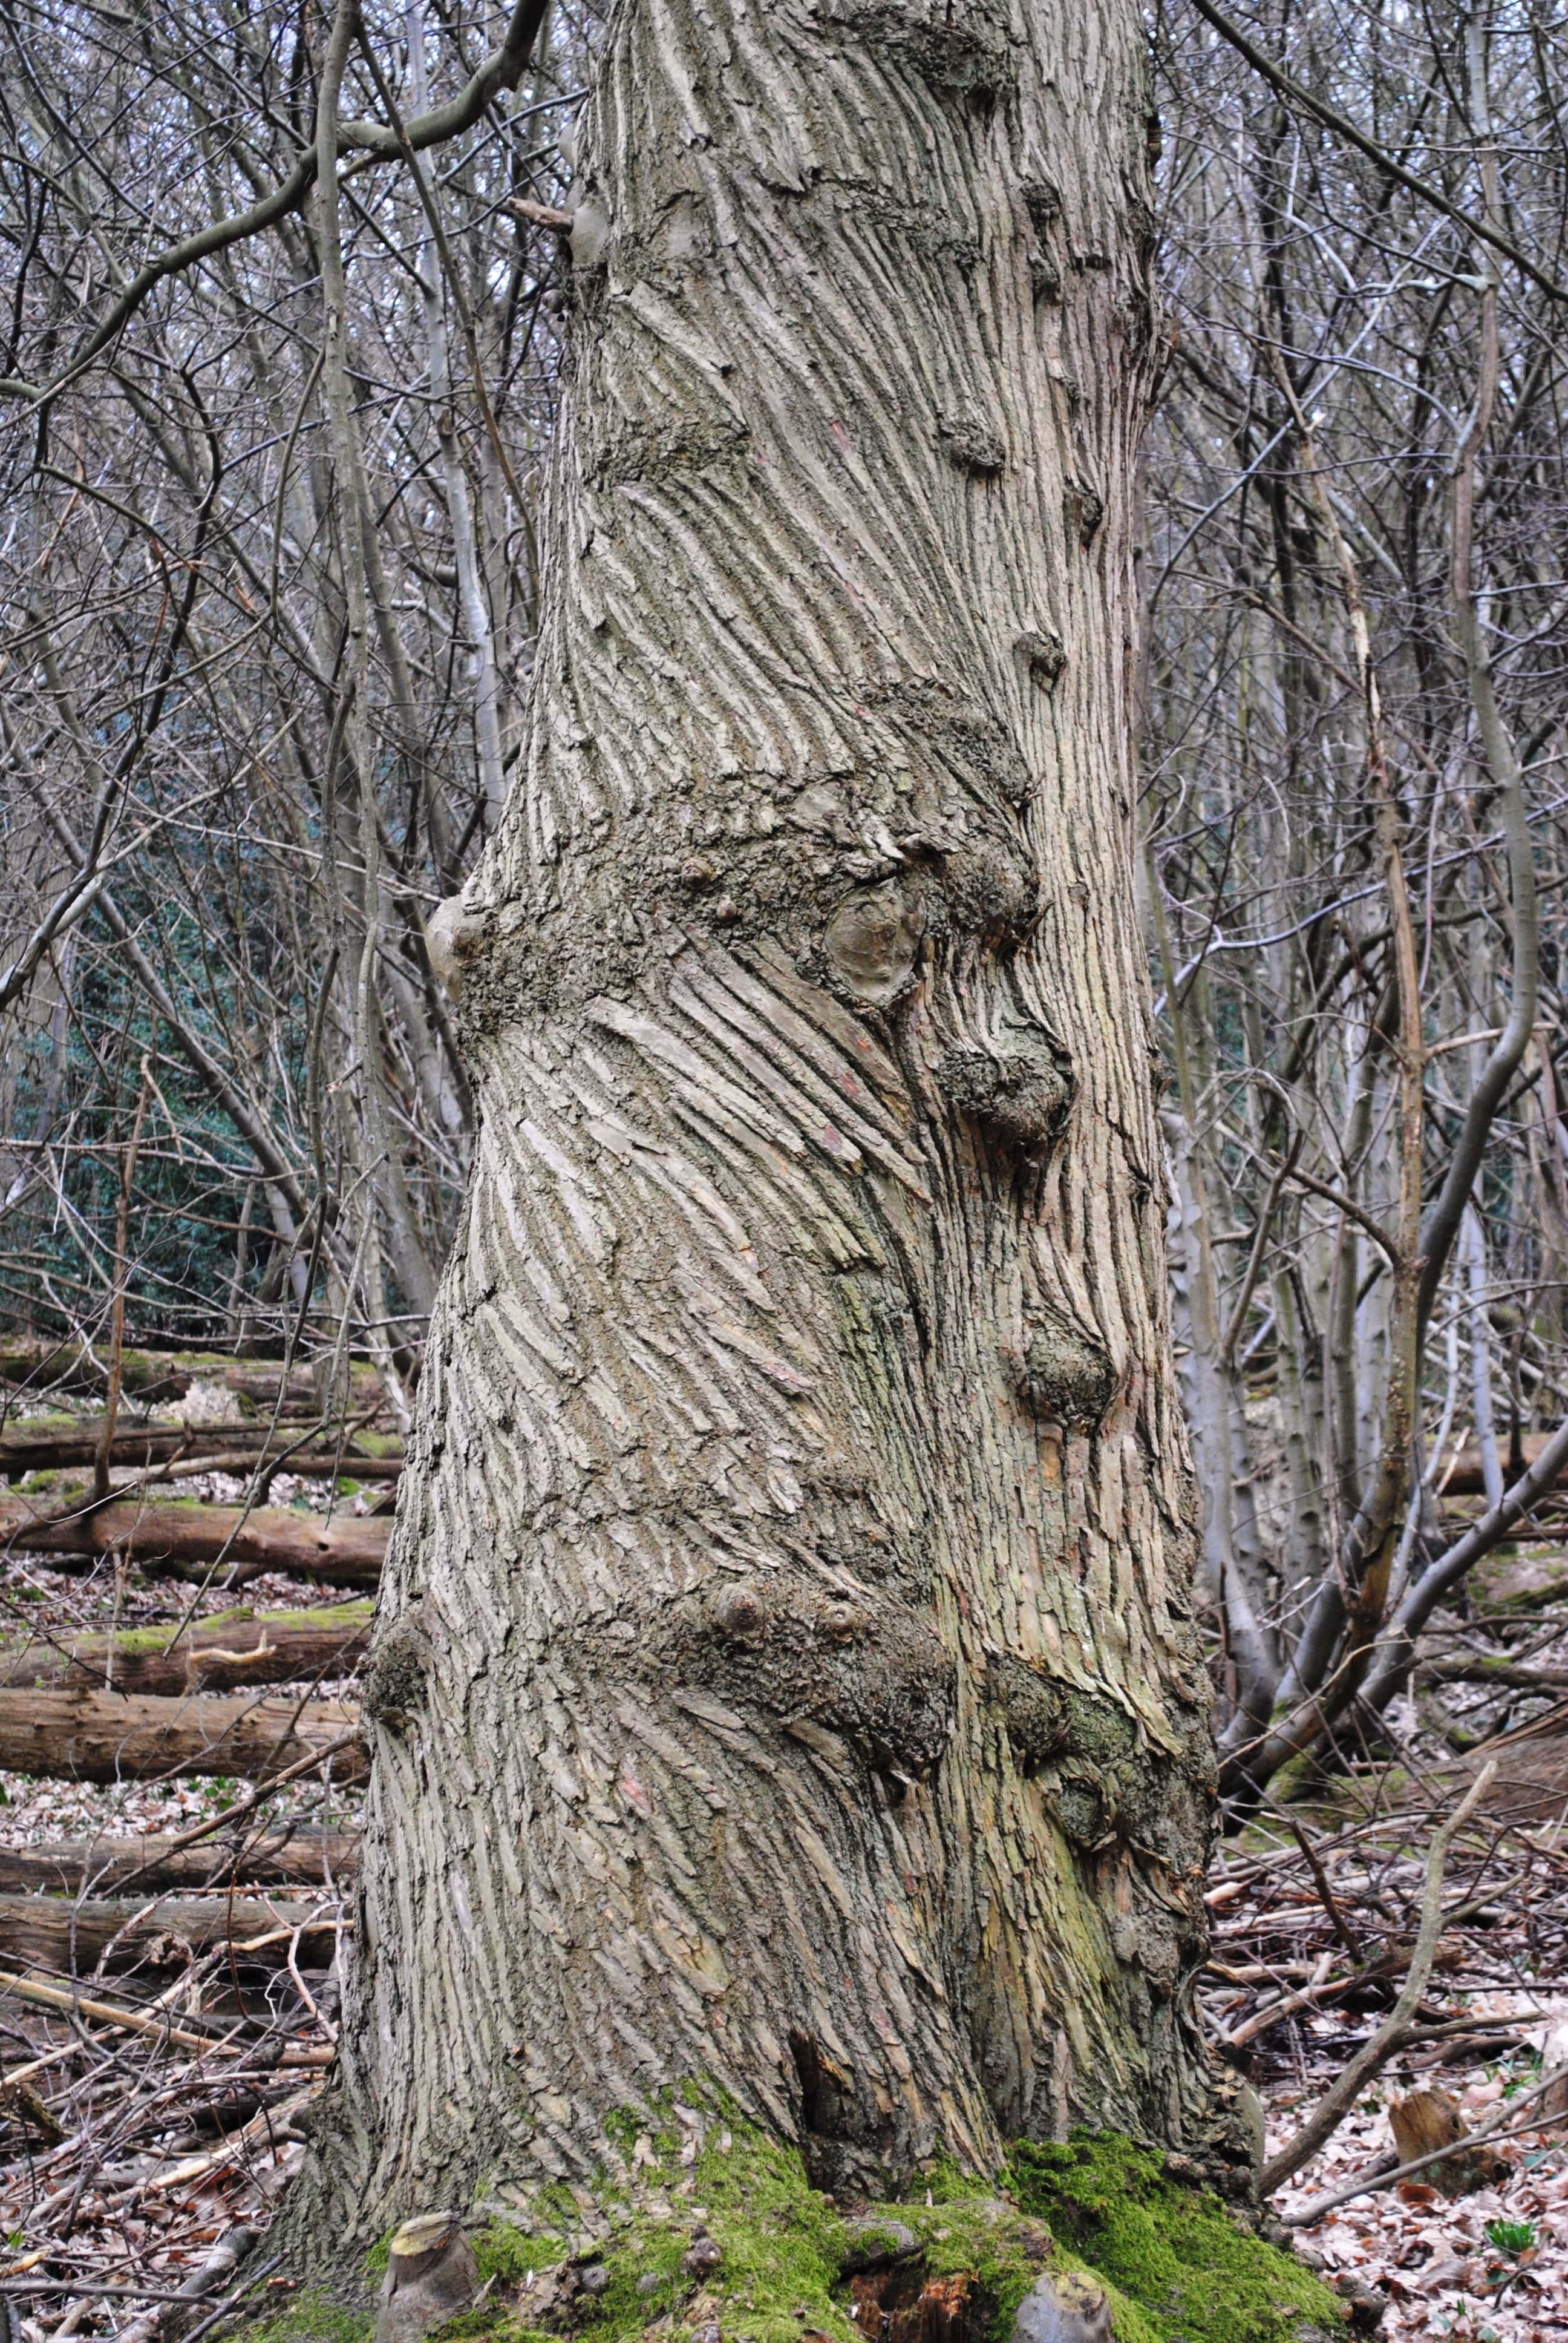 Close-up of big tree trunk, with trees in background.